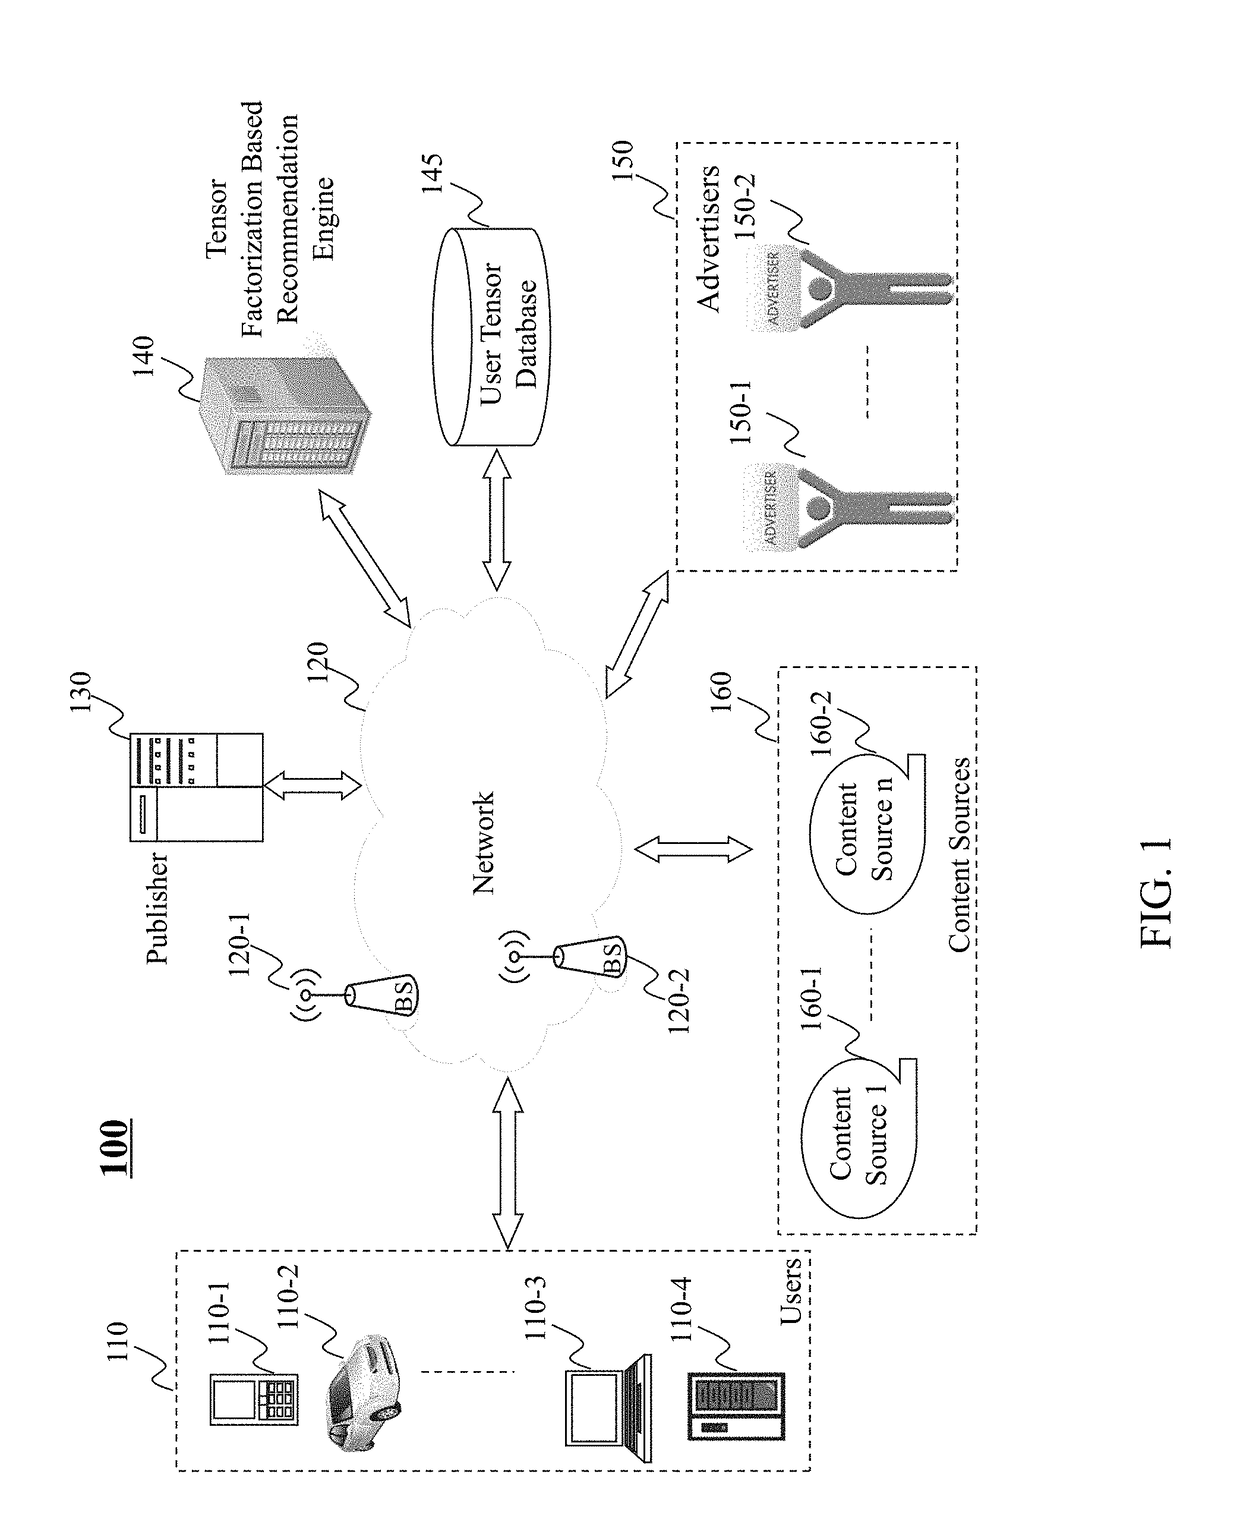 Method and system for recommending content items to a user based on tensor factorization